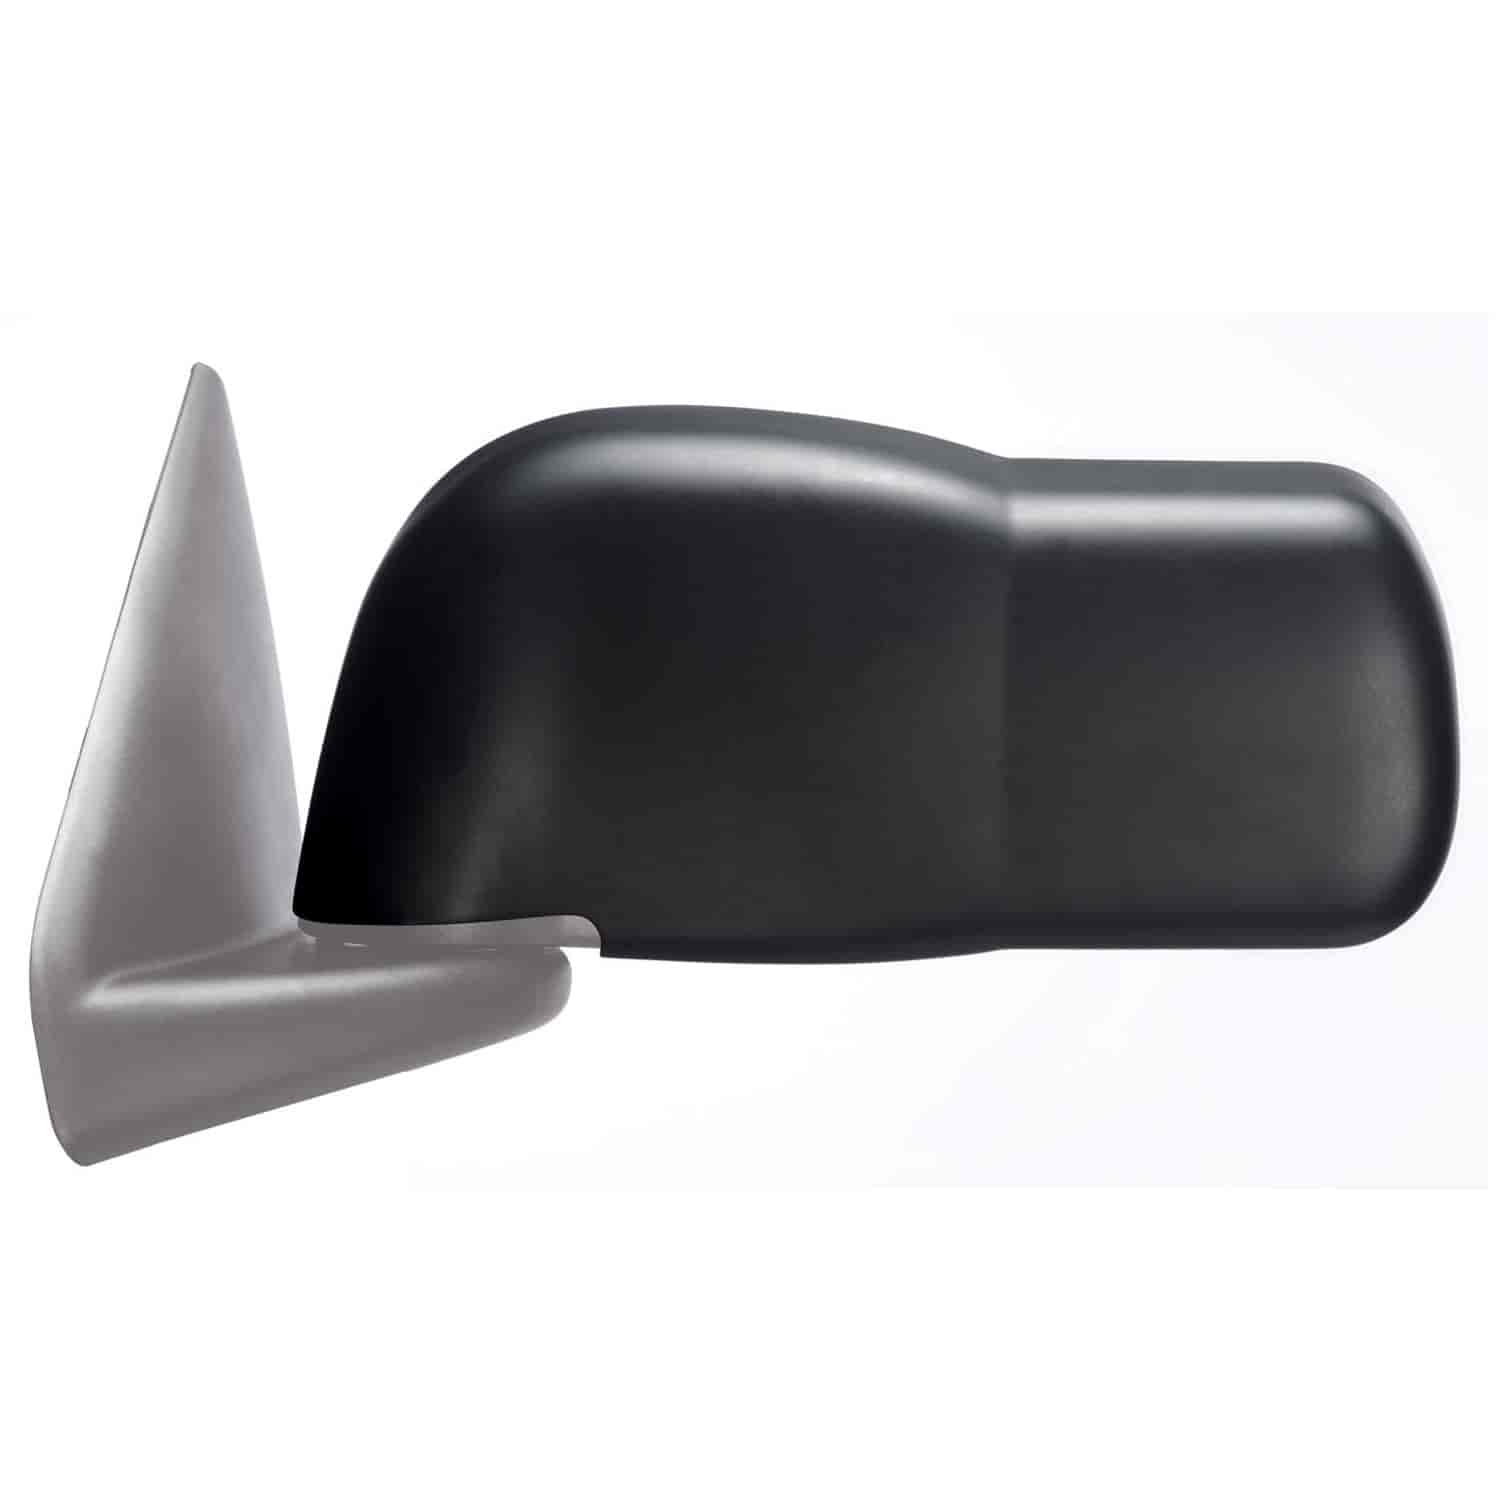 Snap-On Towing Mirrors Fits 2002 to 2008 Dodge Ram 1500